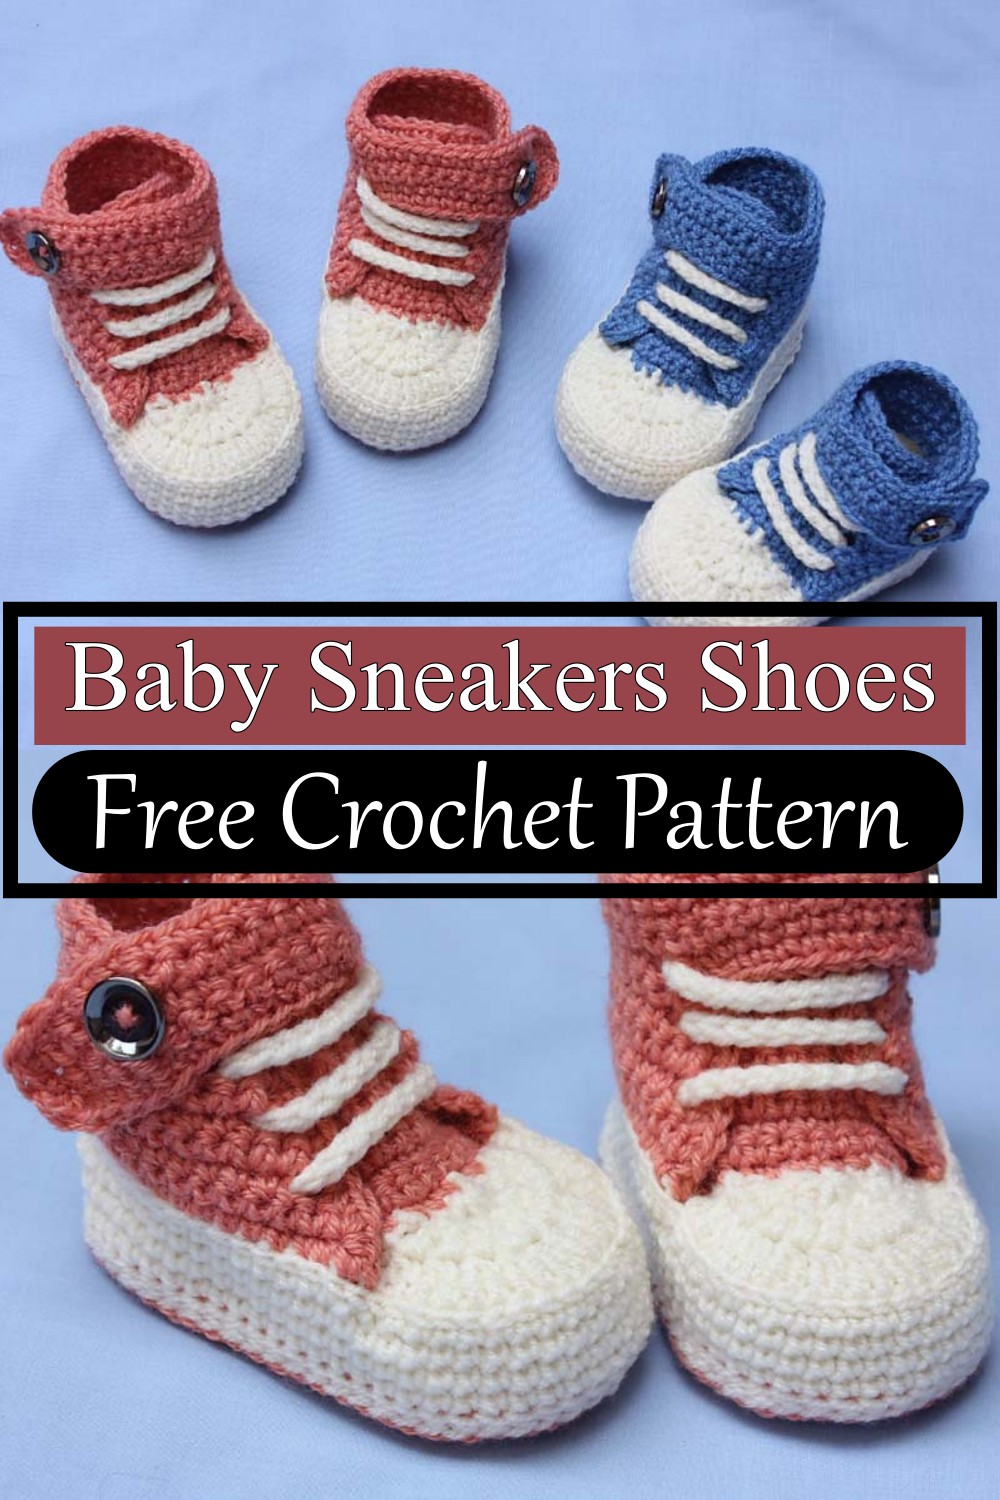 Baby Sneakers Shoes